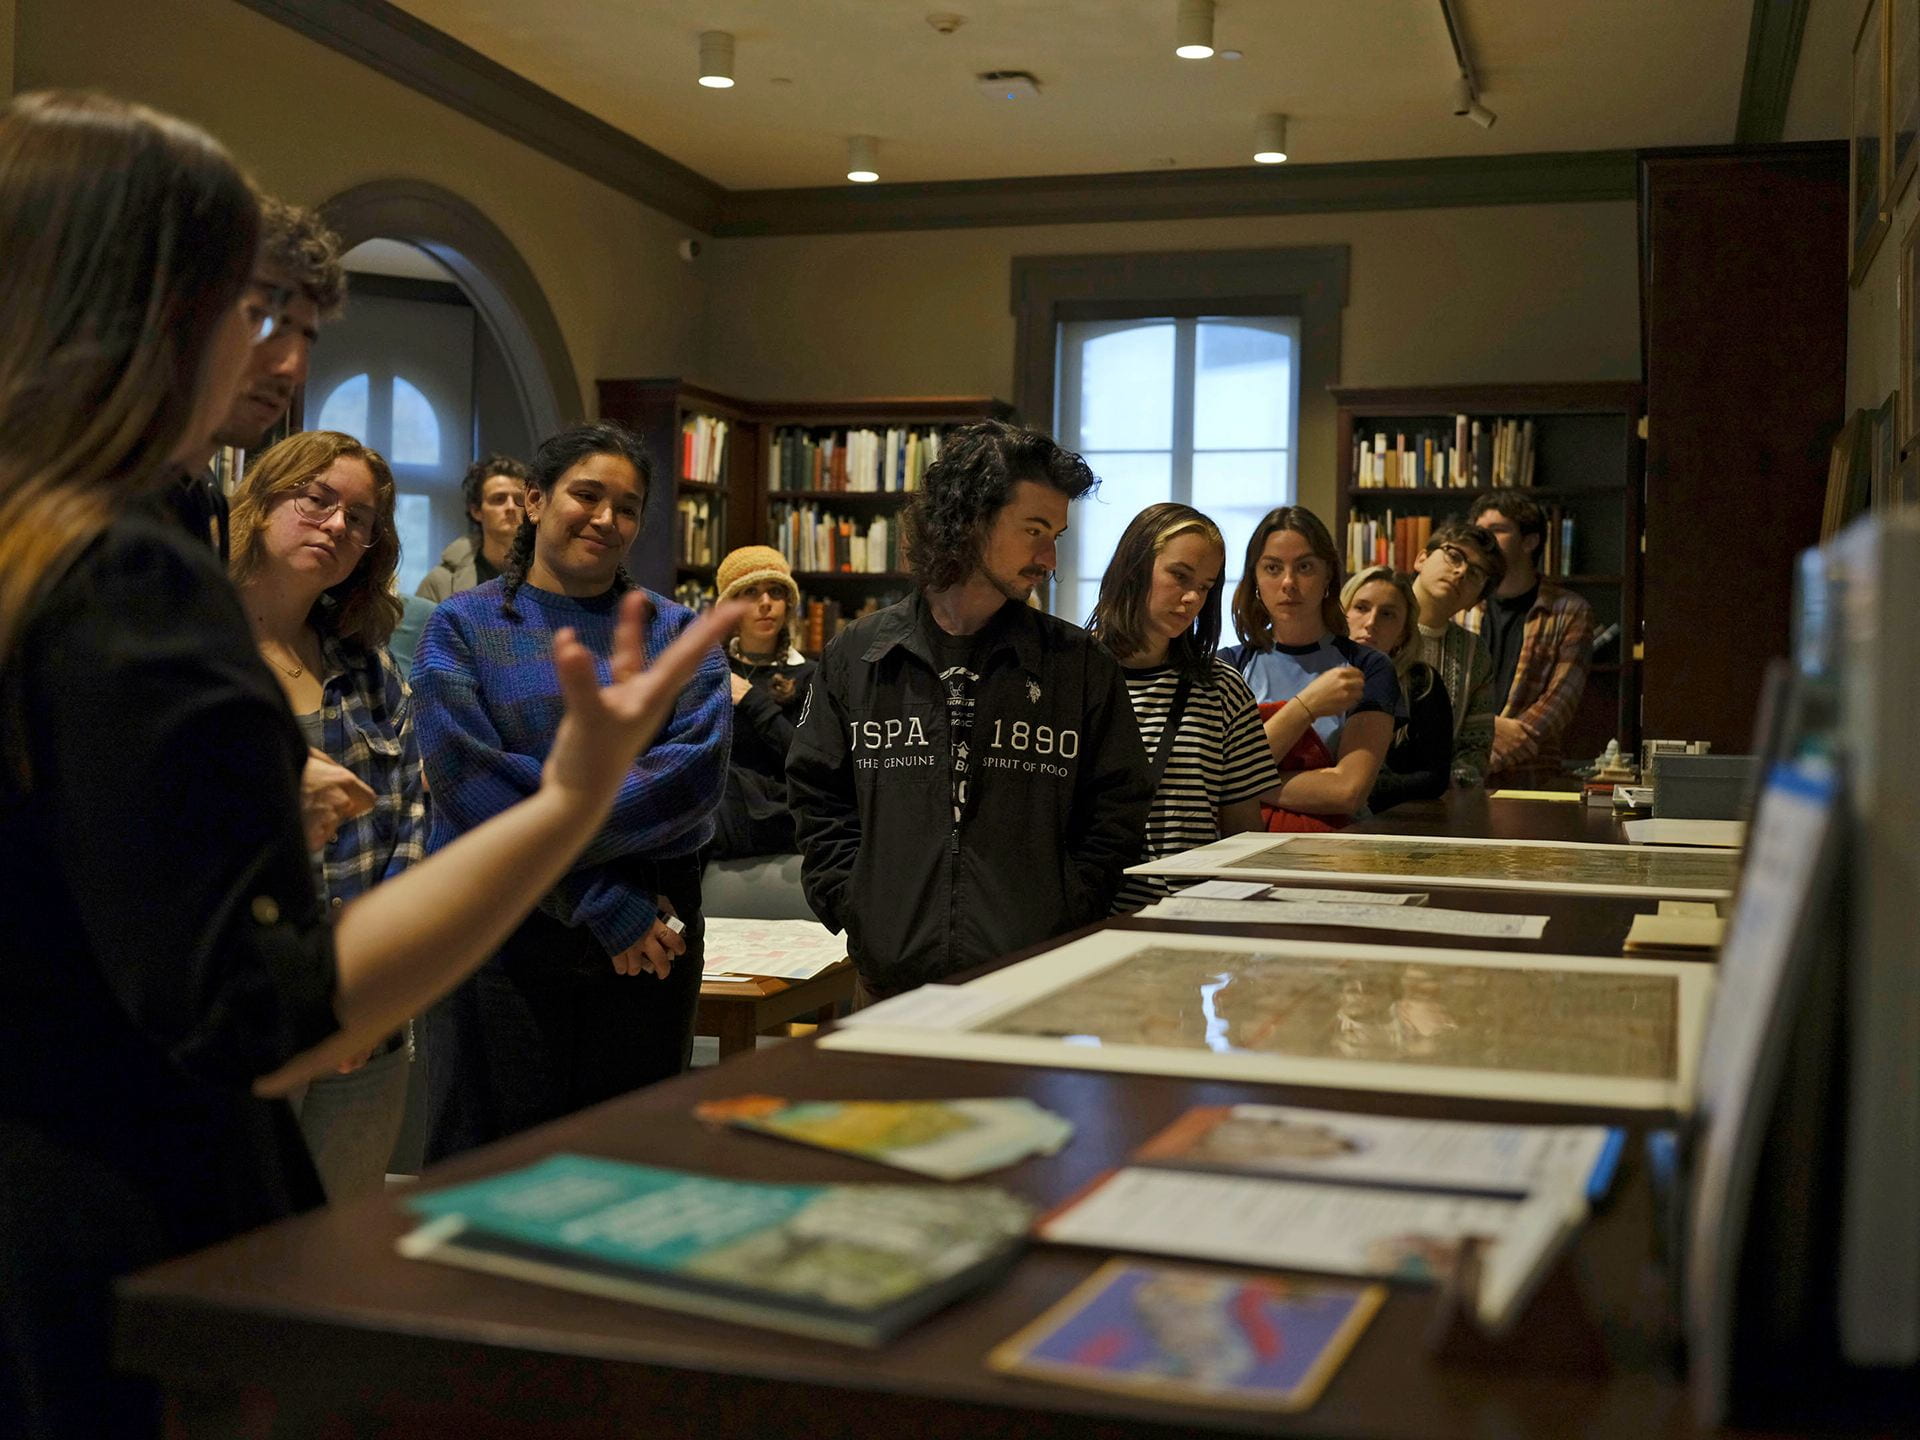 A group of college students gather around a display of historical prints